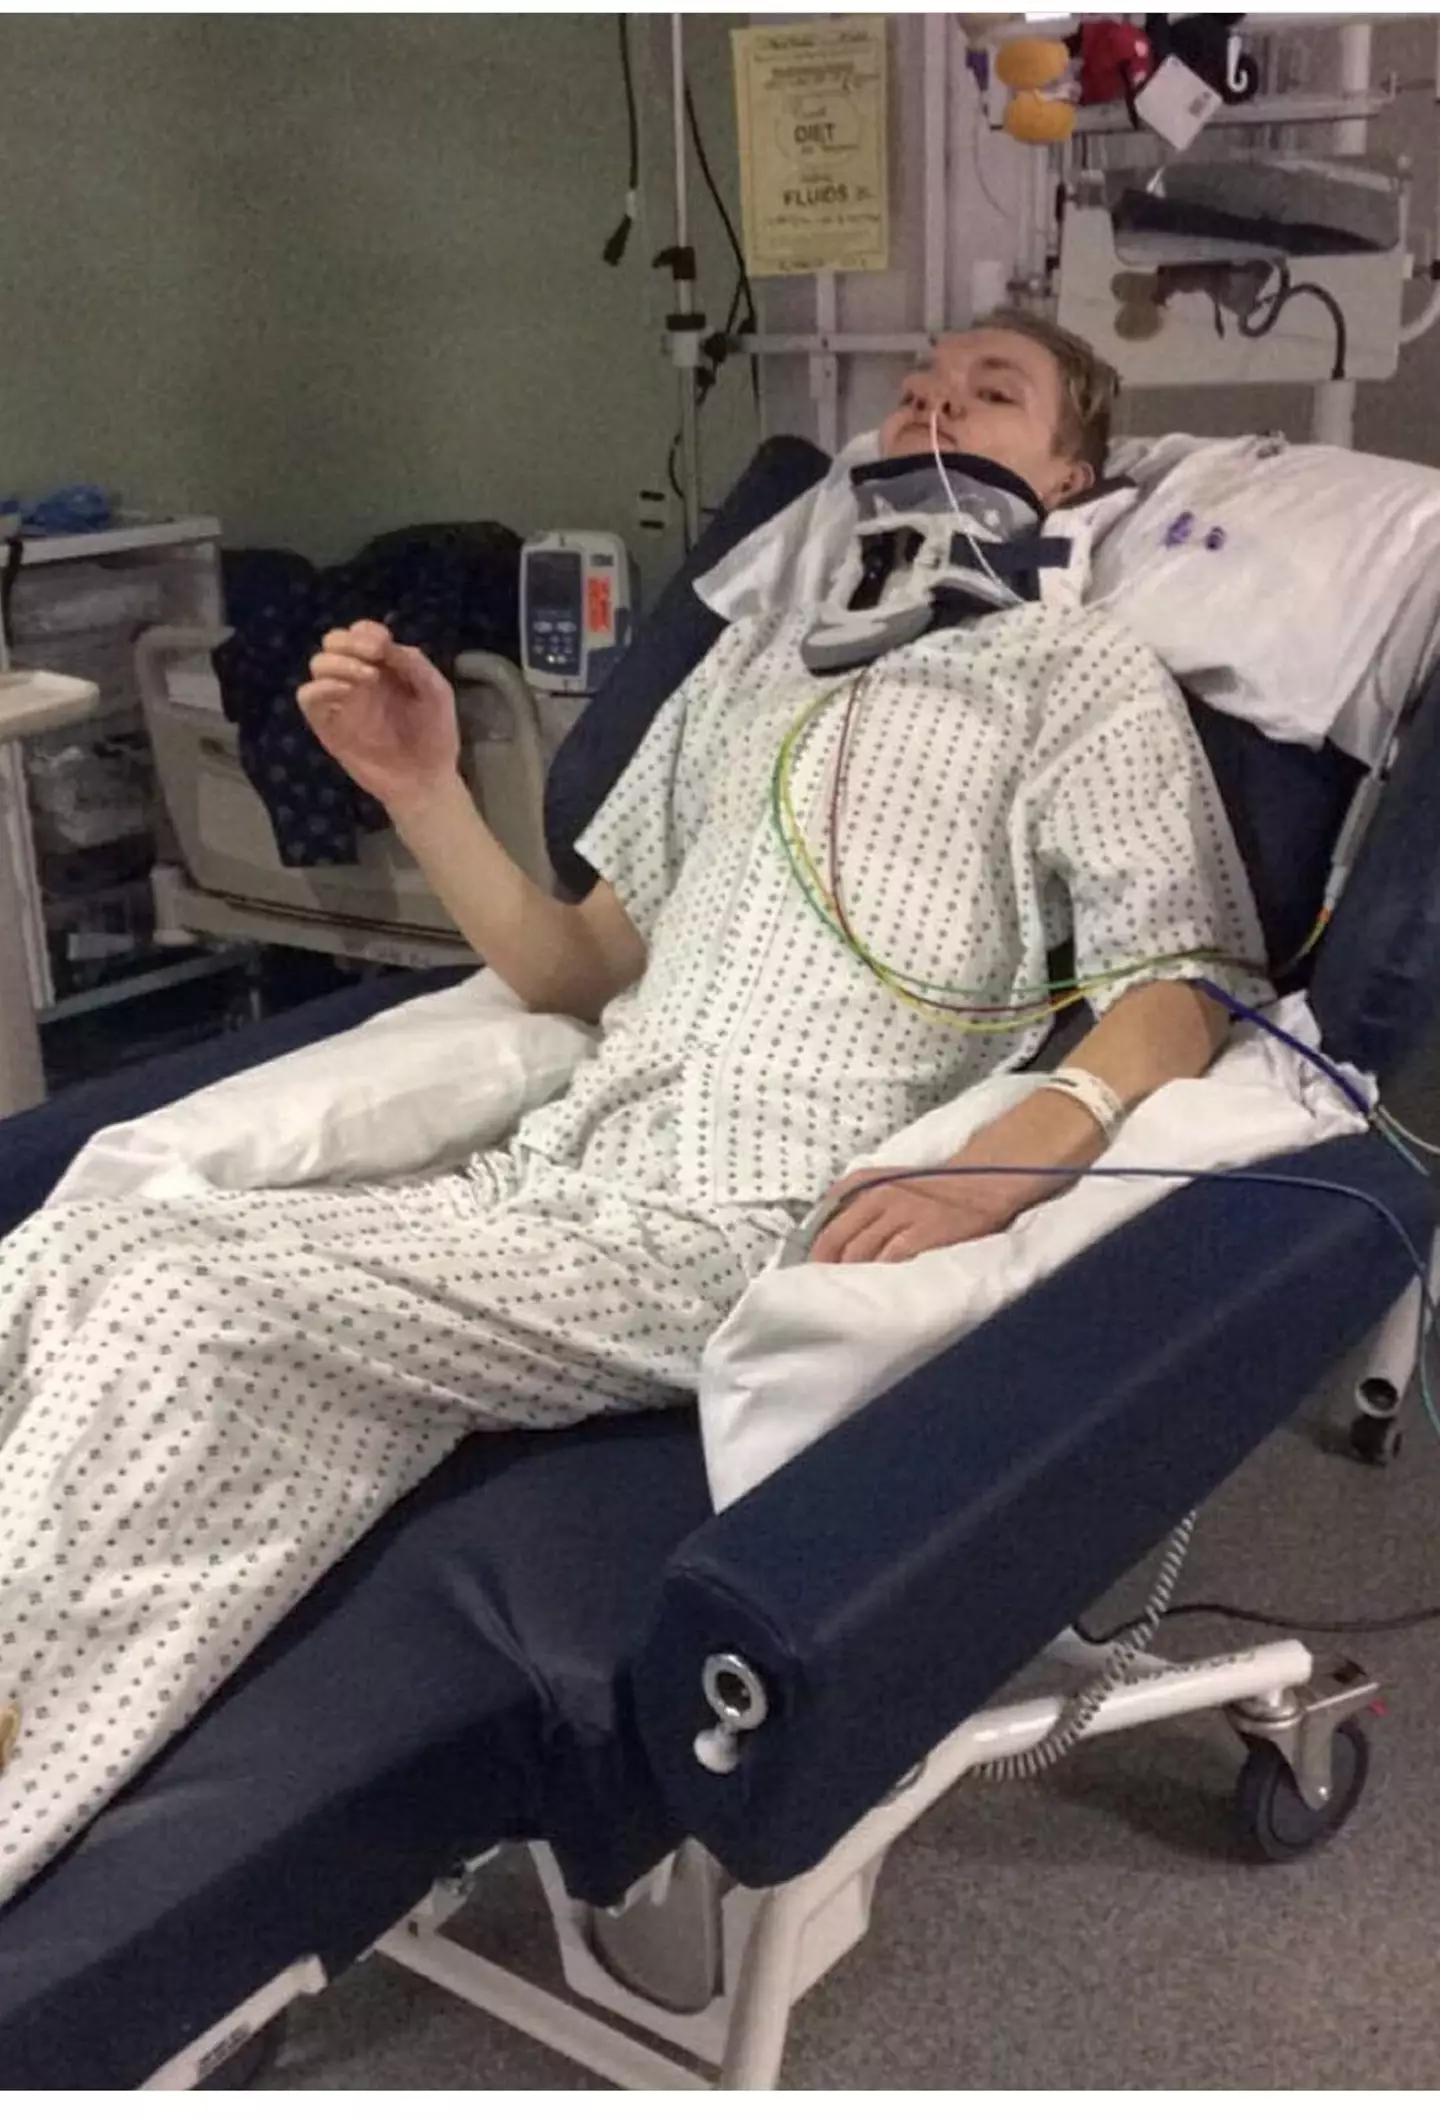 Daniel Moseley was paralysed after a visit to Flip Out in Stoke.